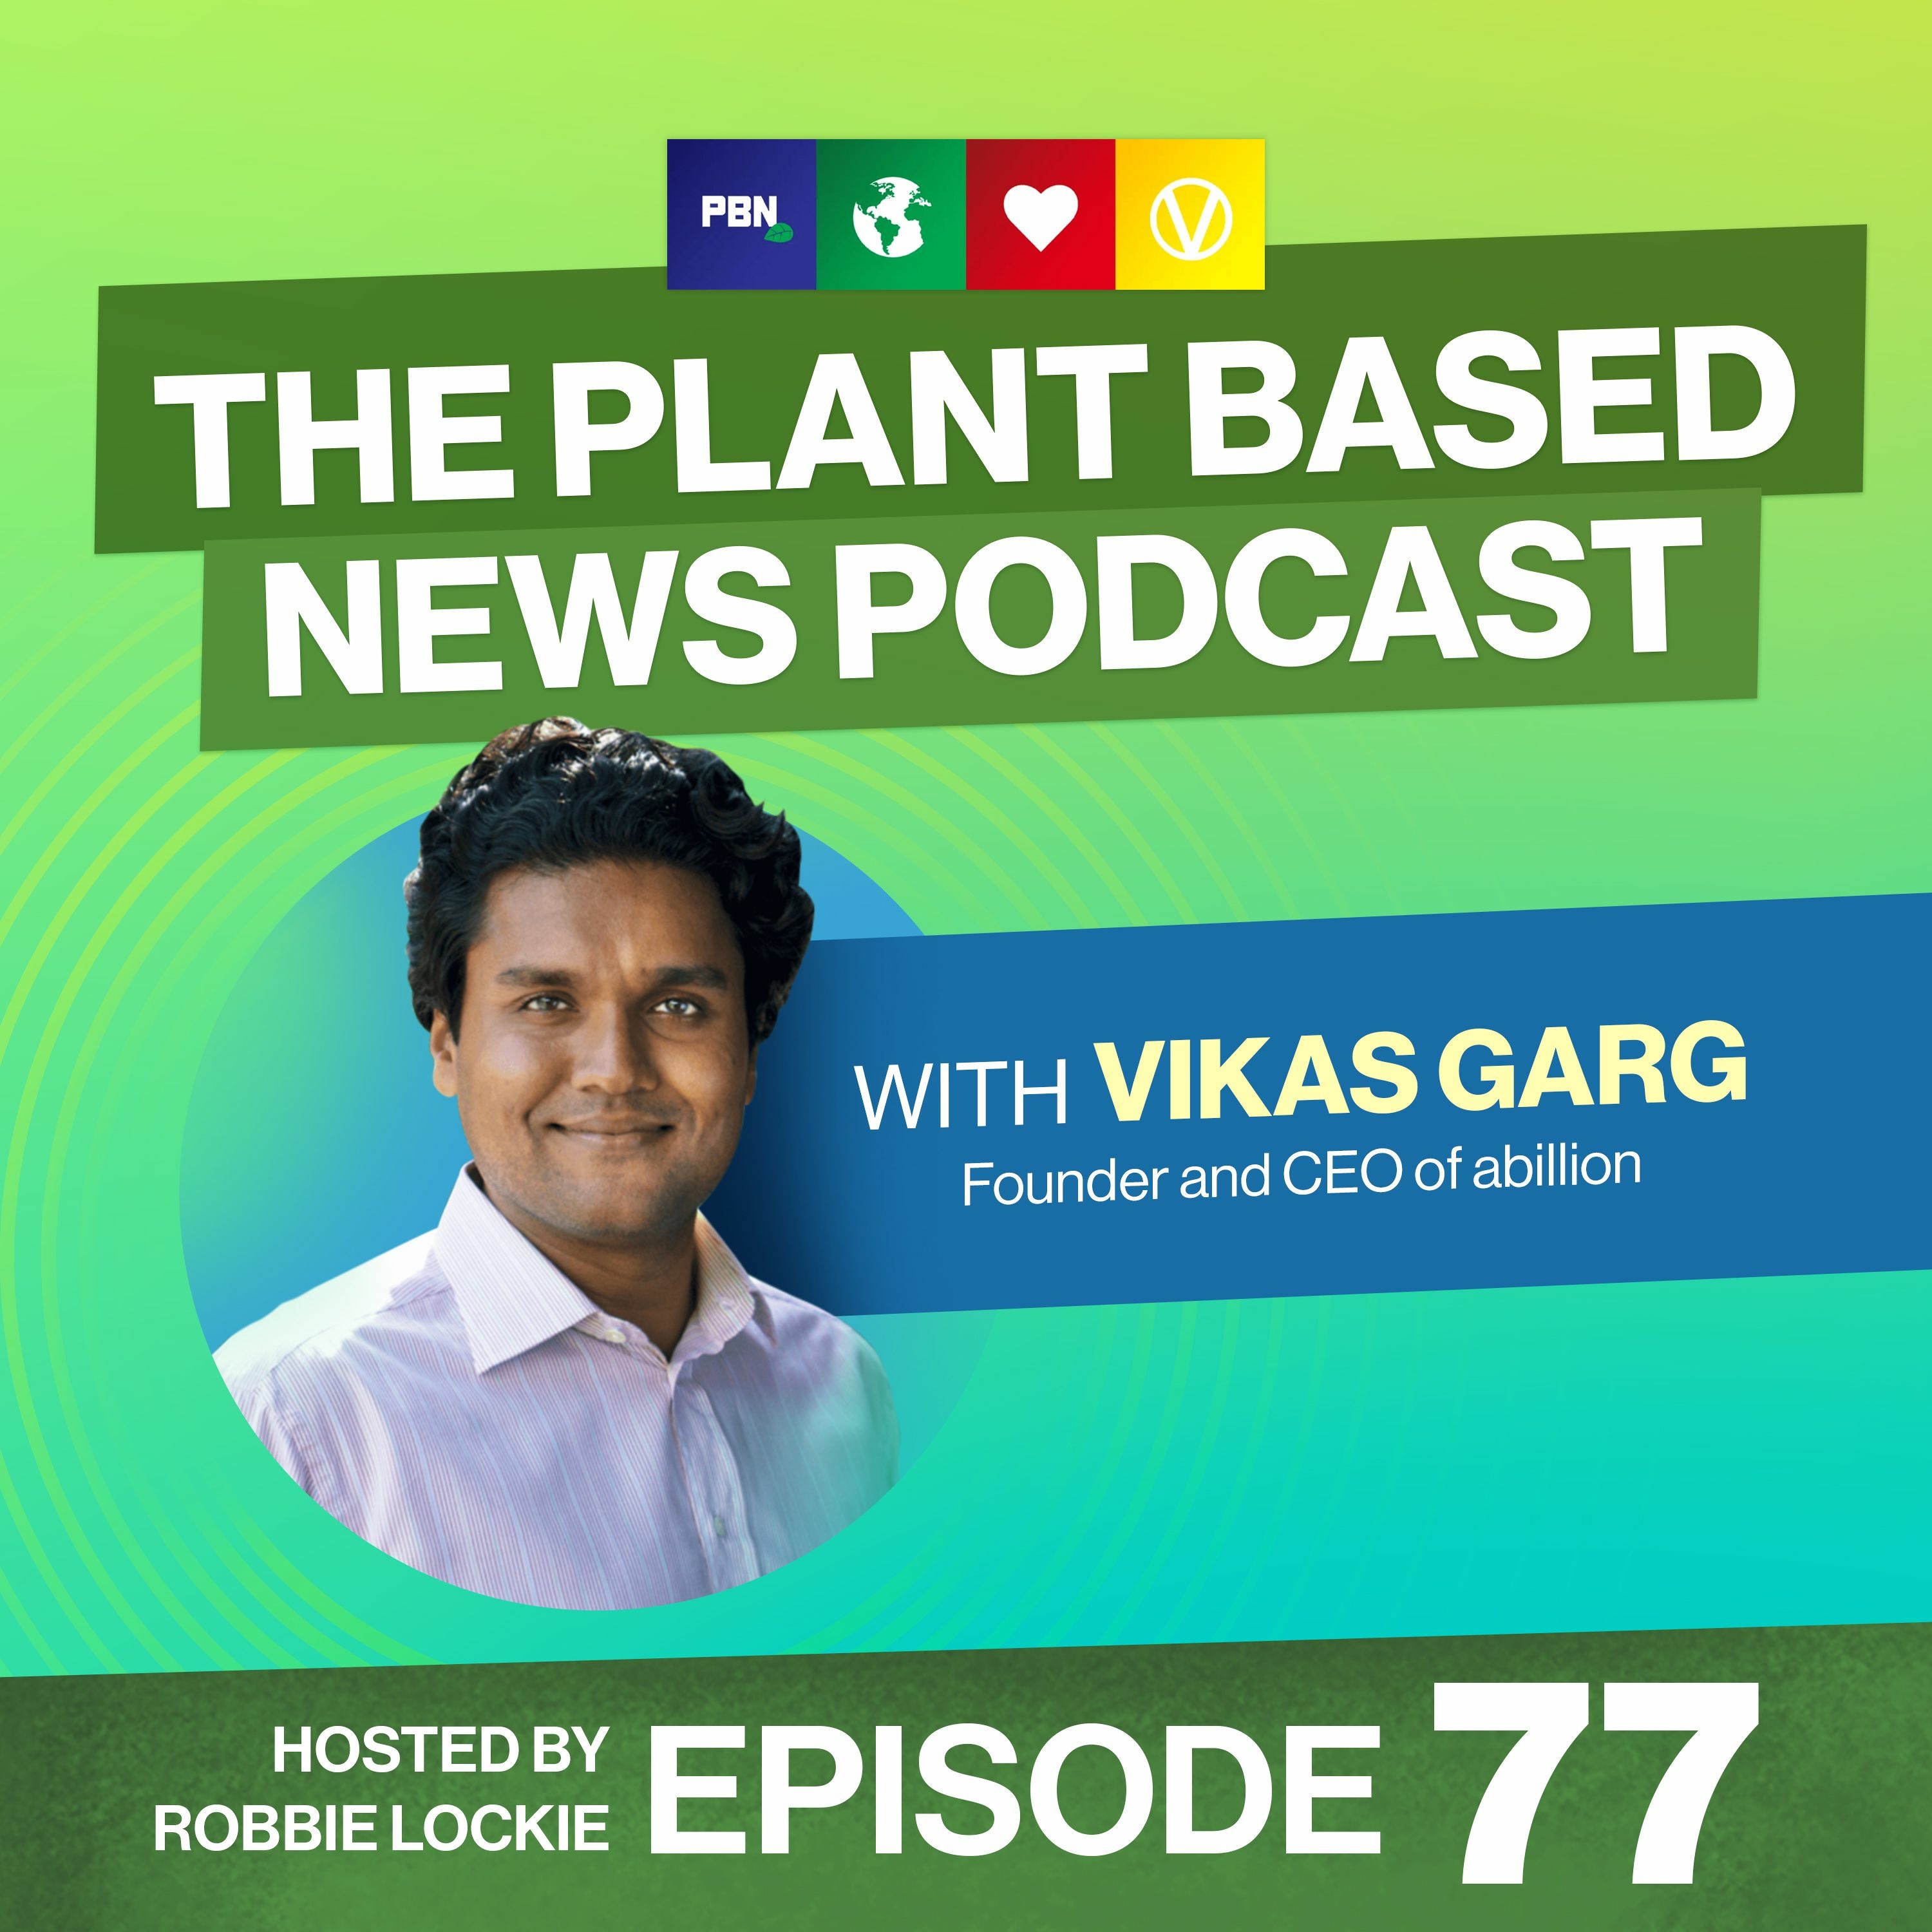 'aBillion' Ways To Inspire Real Change - Interview With Vikas Garg / Episode 77